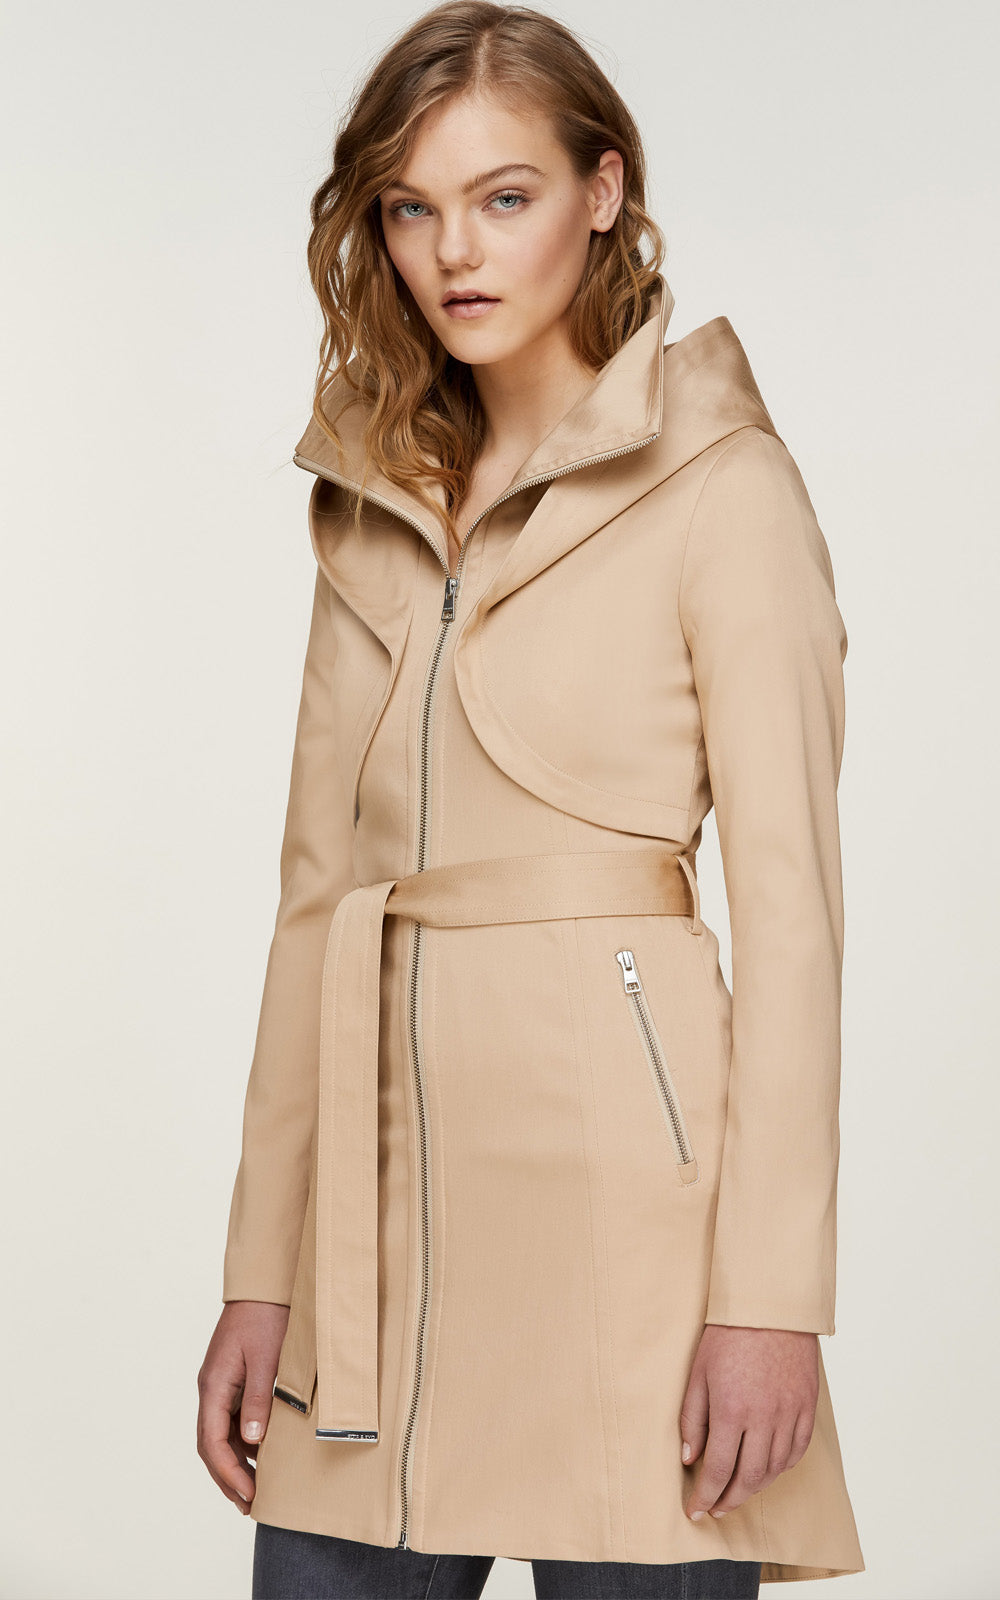 Must-have coats for this spring